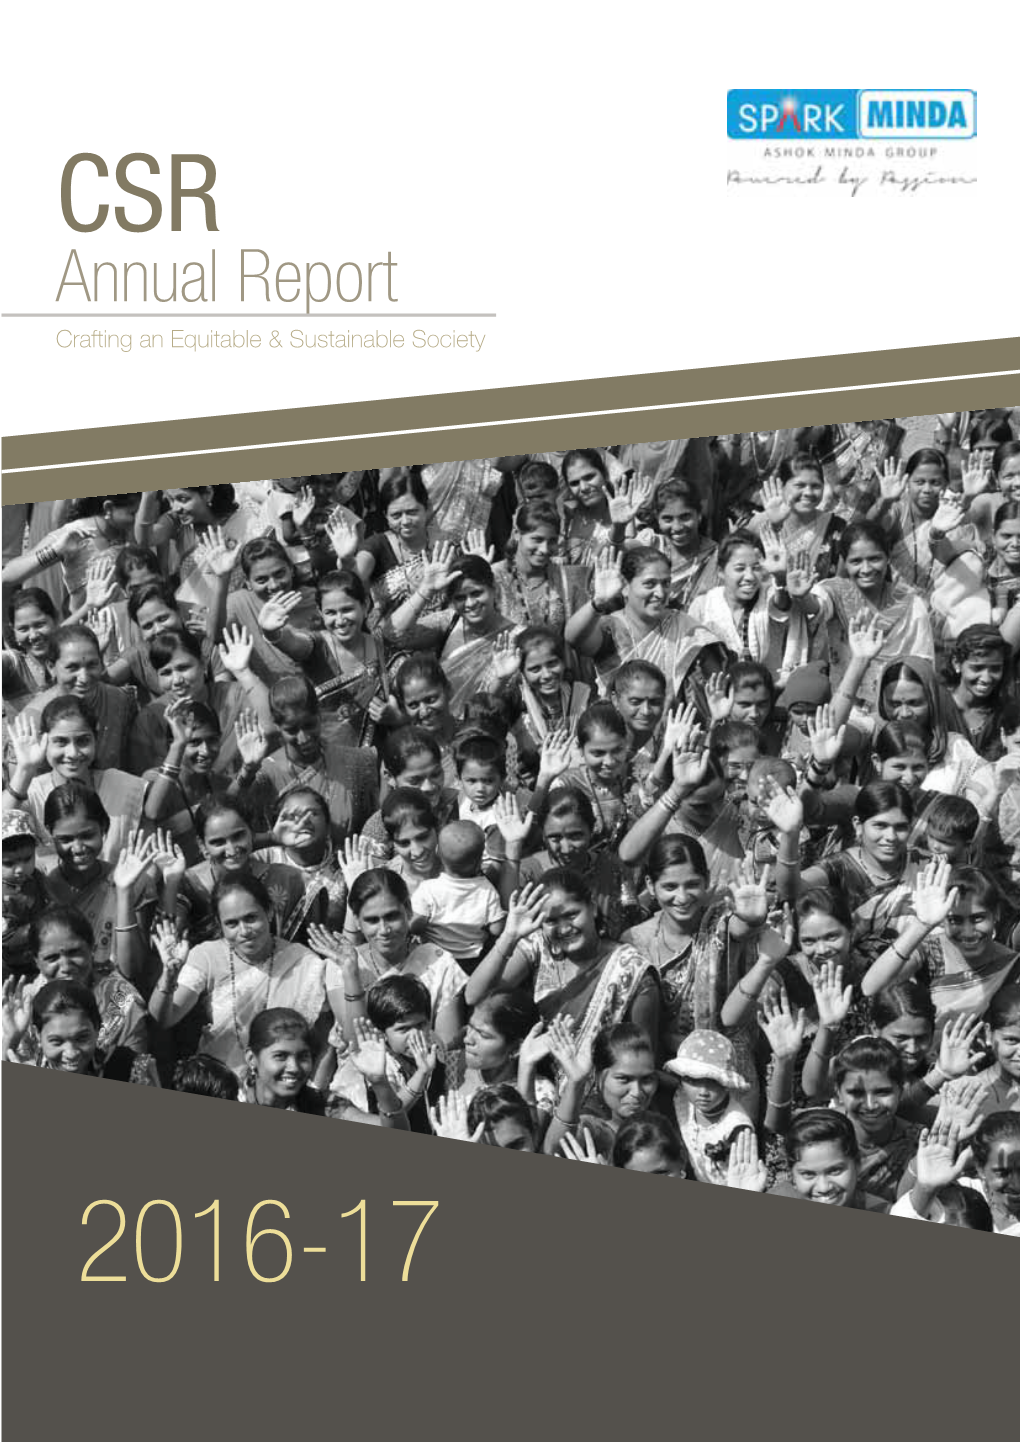 CSR Annual Report Crafting an Equitable & Sustainable Society